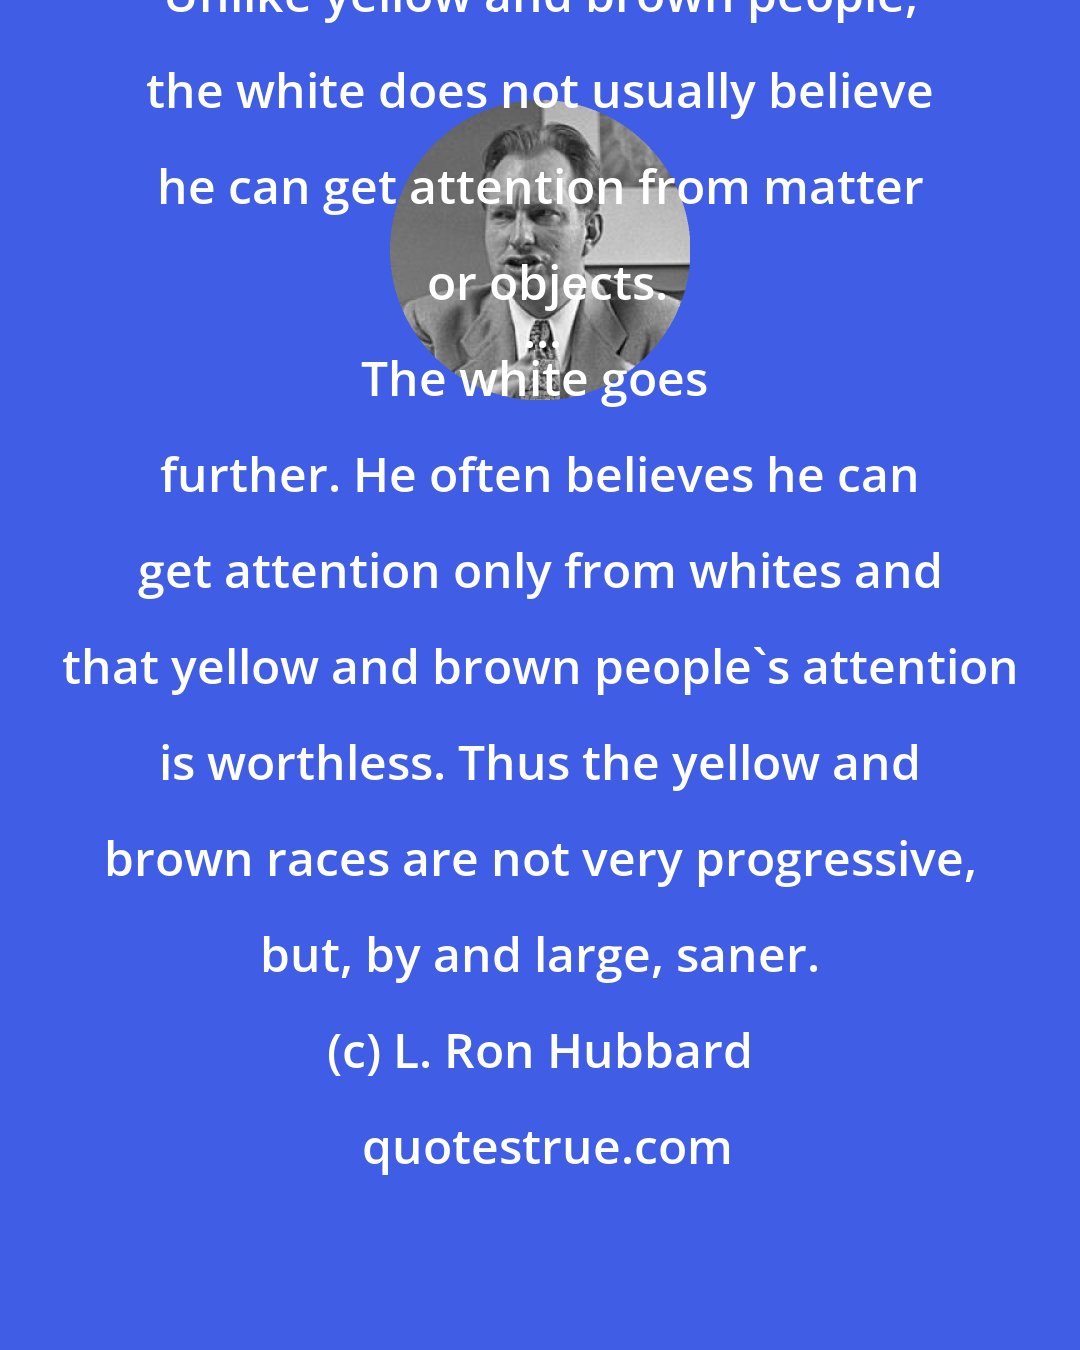 L. Ron Hubbard: Unlike yellow and brown people, the white does not usually believe he can get attention from matter or objects.
...
The white goes further. He often believes he can get attention only from whites and that yellow and brown people's attention is worthless. Thus the yellow and brown races are not very progressive, but, by and large, saner.